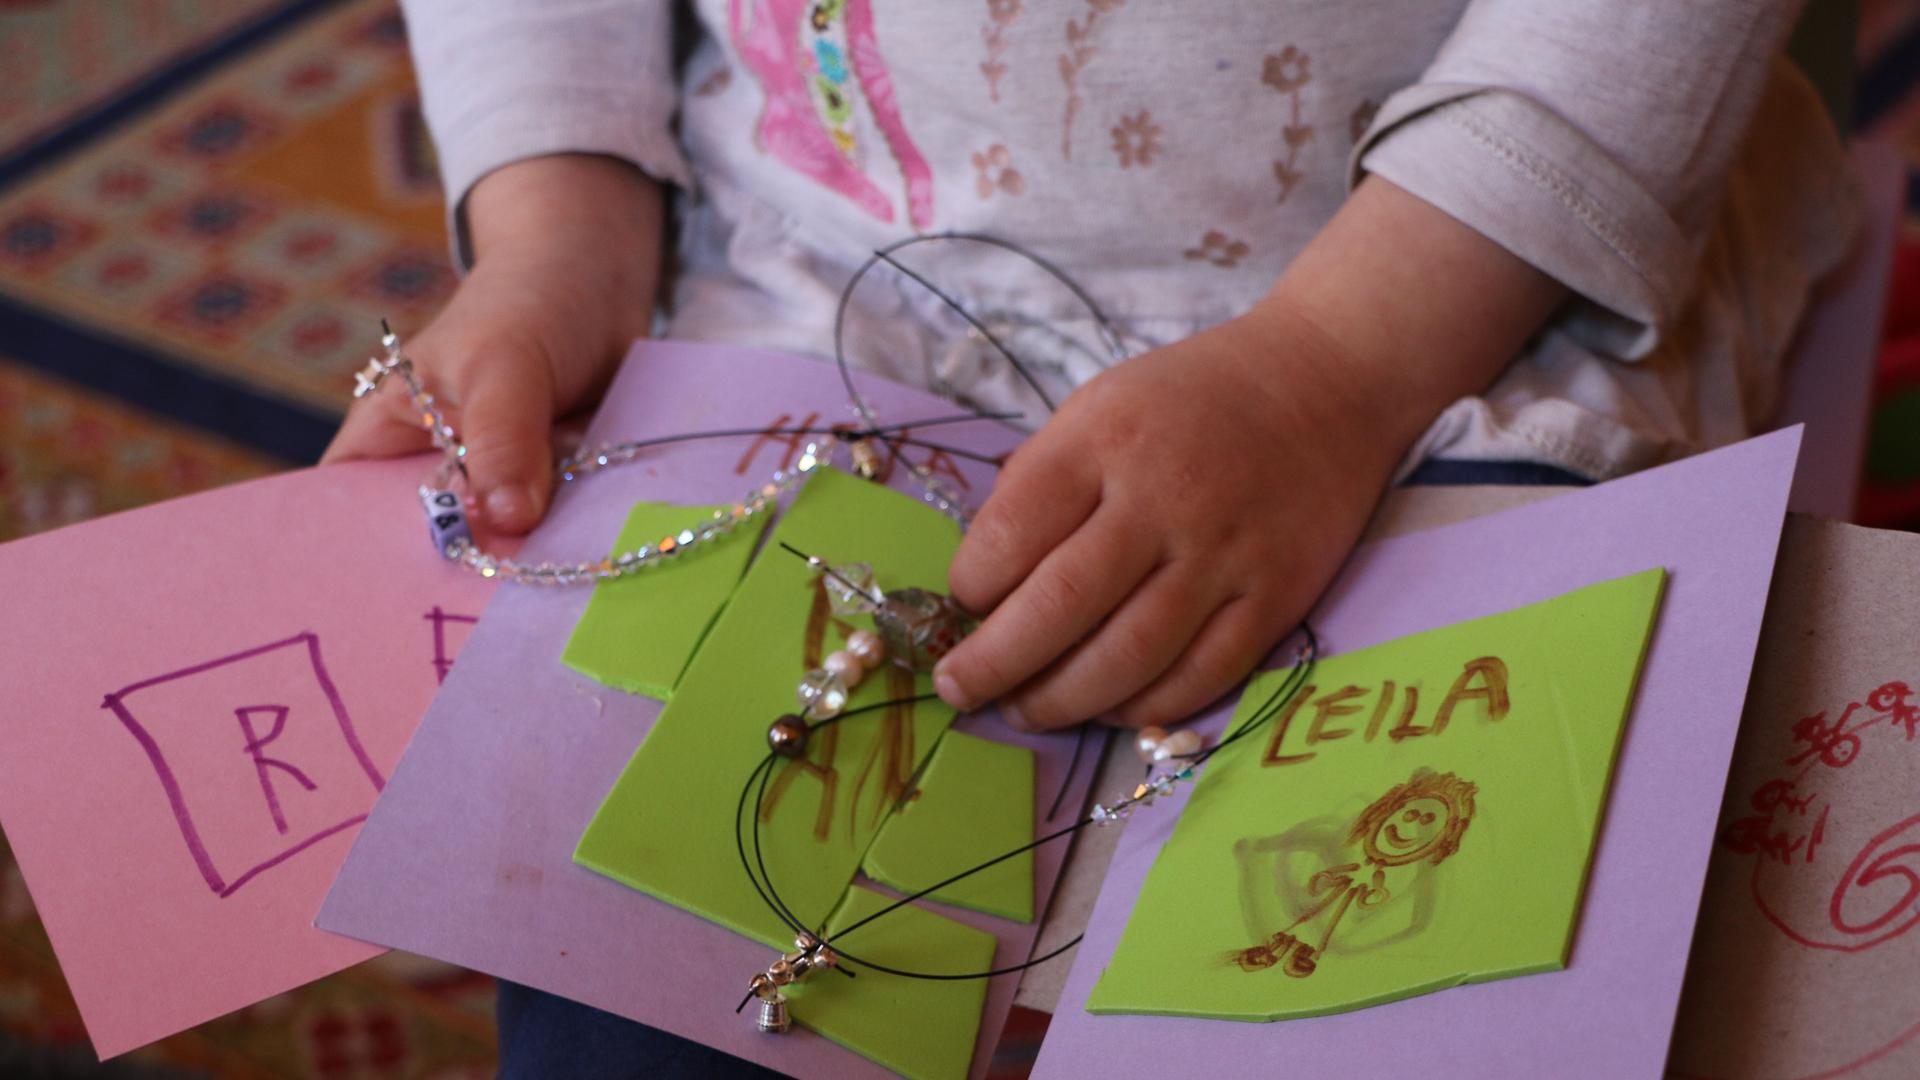 The author's 3-year-old daughter Leila has been occupying herself during the "stay at home" order in Boston amid the coronavirus outbreak by making cards and beaded necklaces for her preschool friends. 